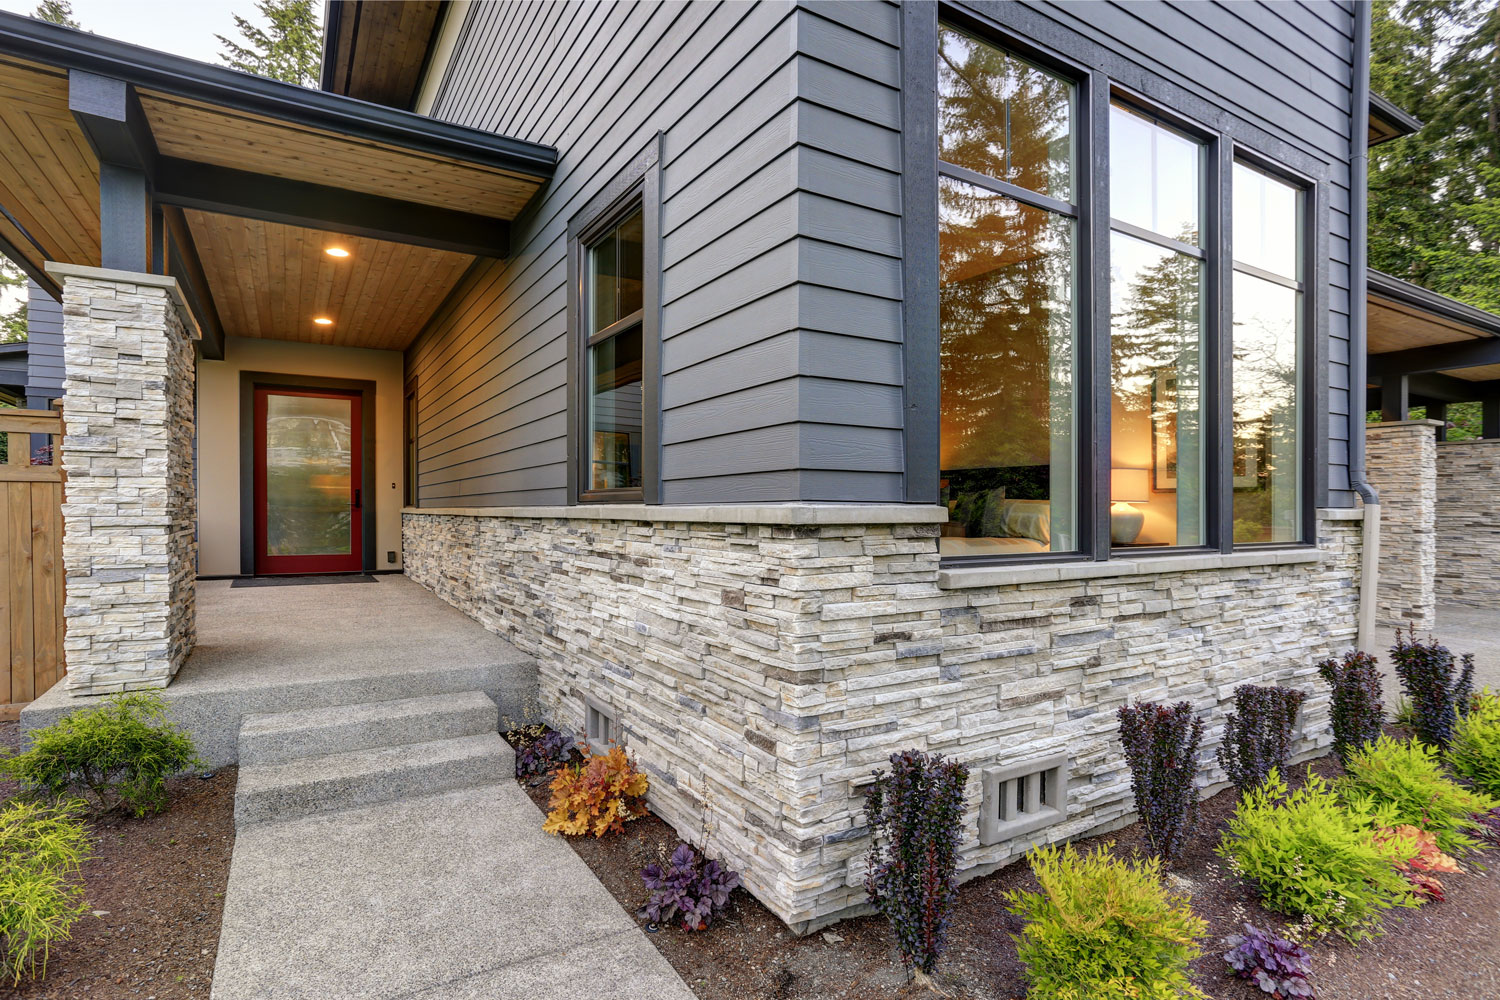 Modern contemporary house with gorgeous, gray sidings, decorative stone cladding and plants in front of the porch, Should You Paint Or Replace Siding? [By Type Of Siding]